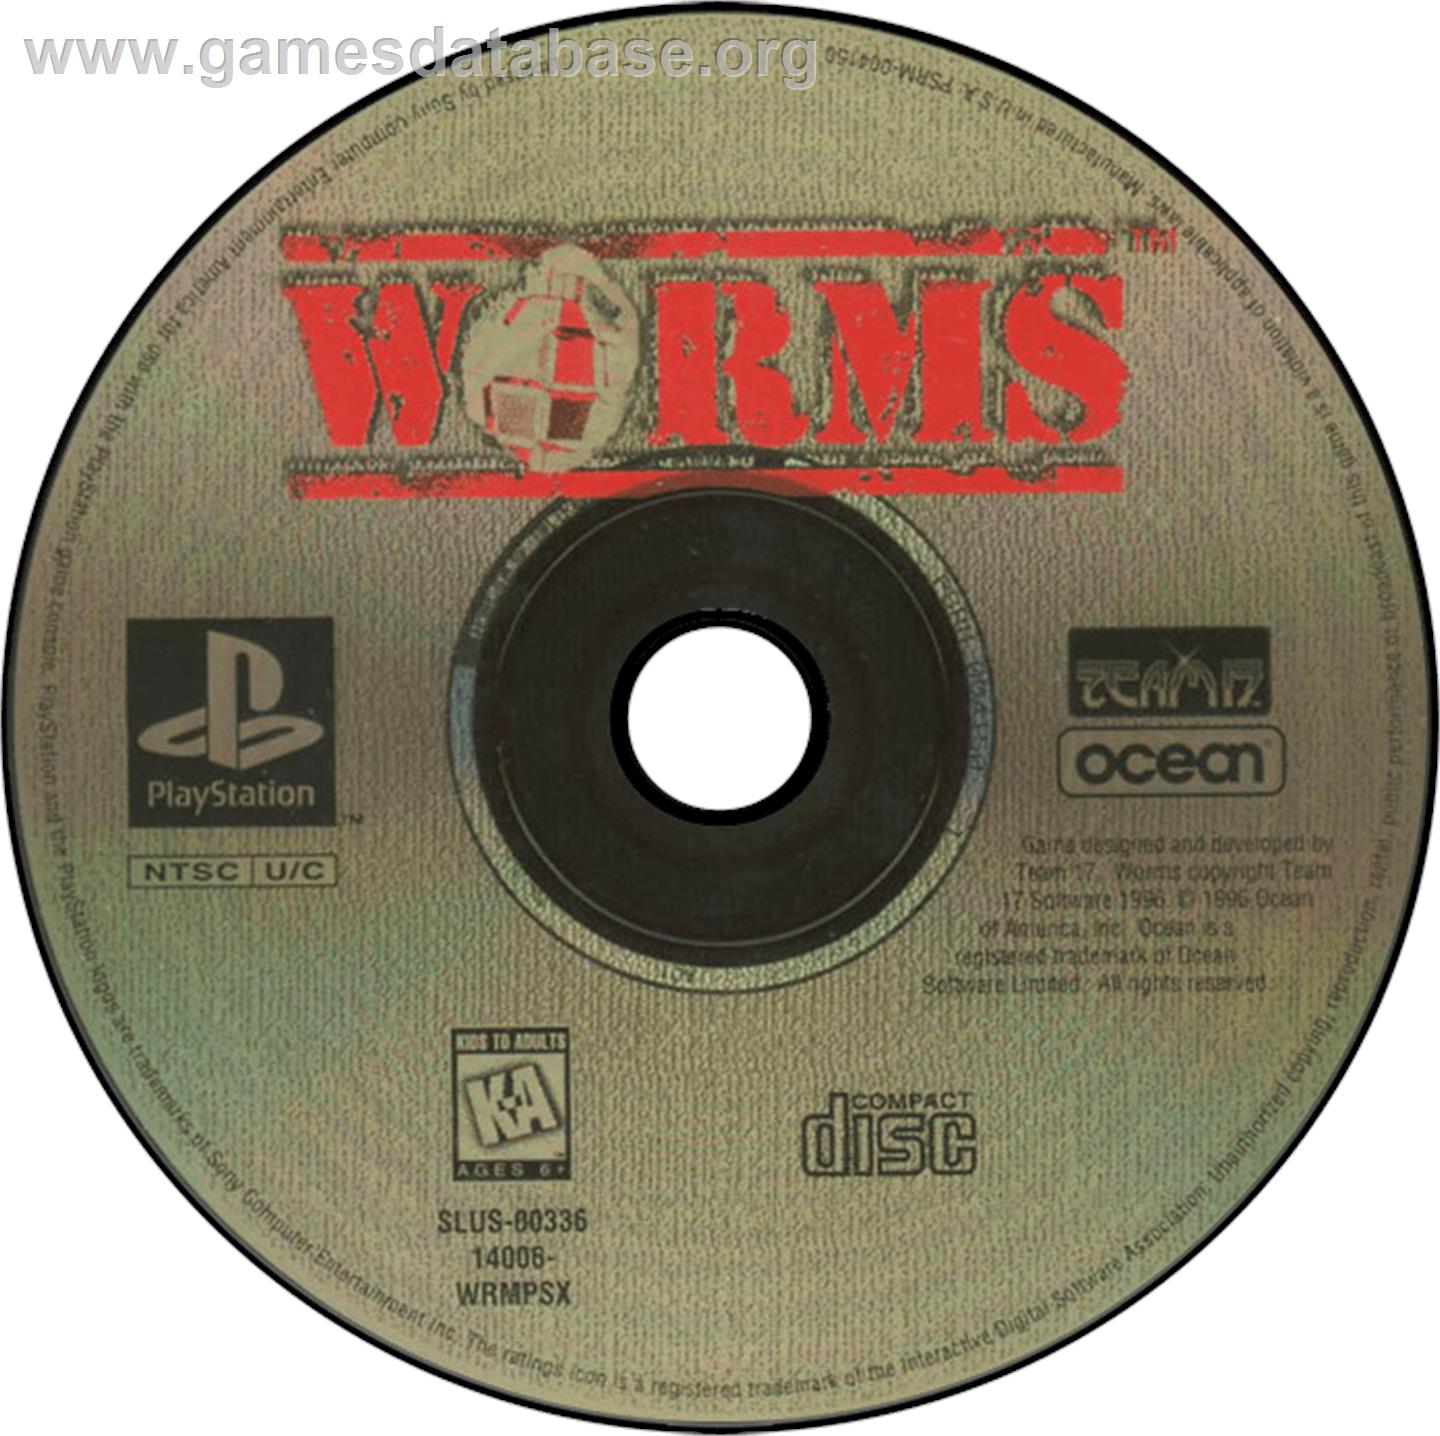 Worms - Sony Playstation - Artwork - Disc